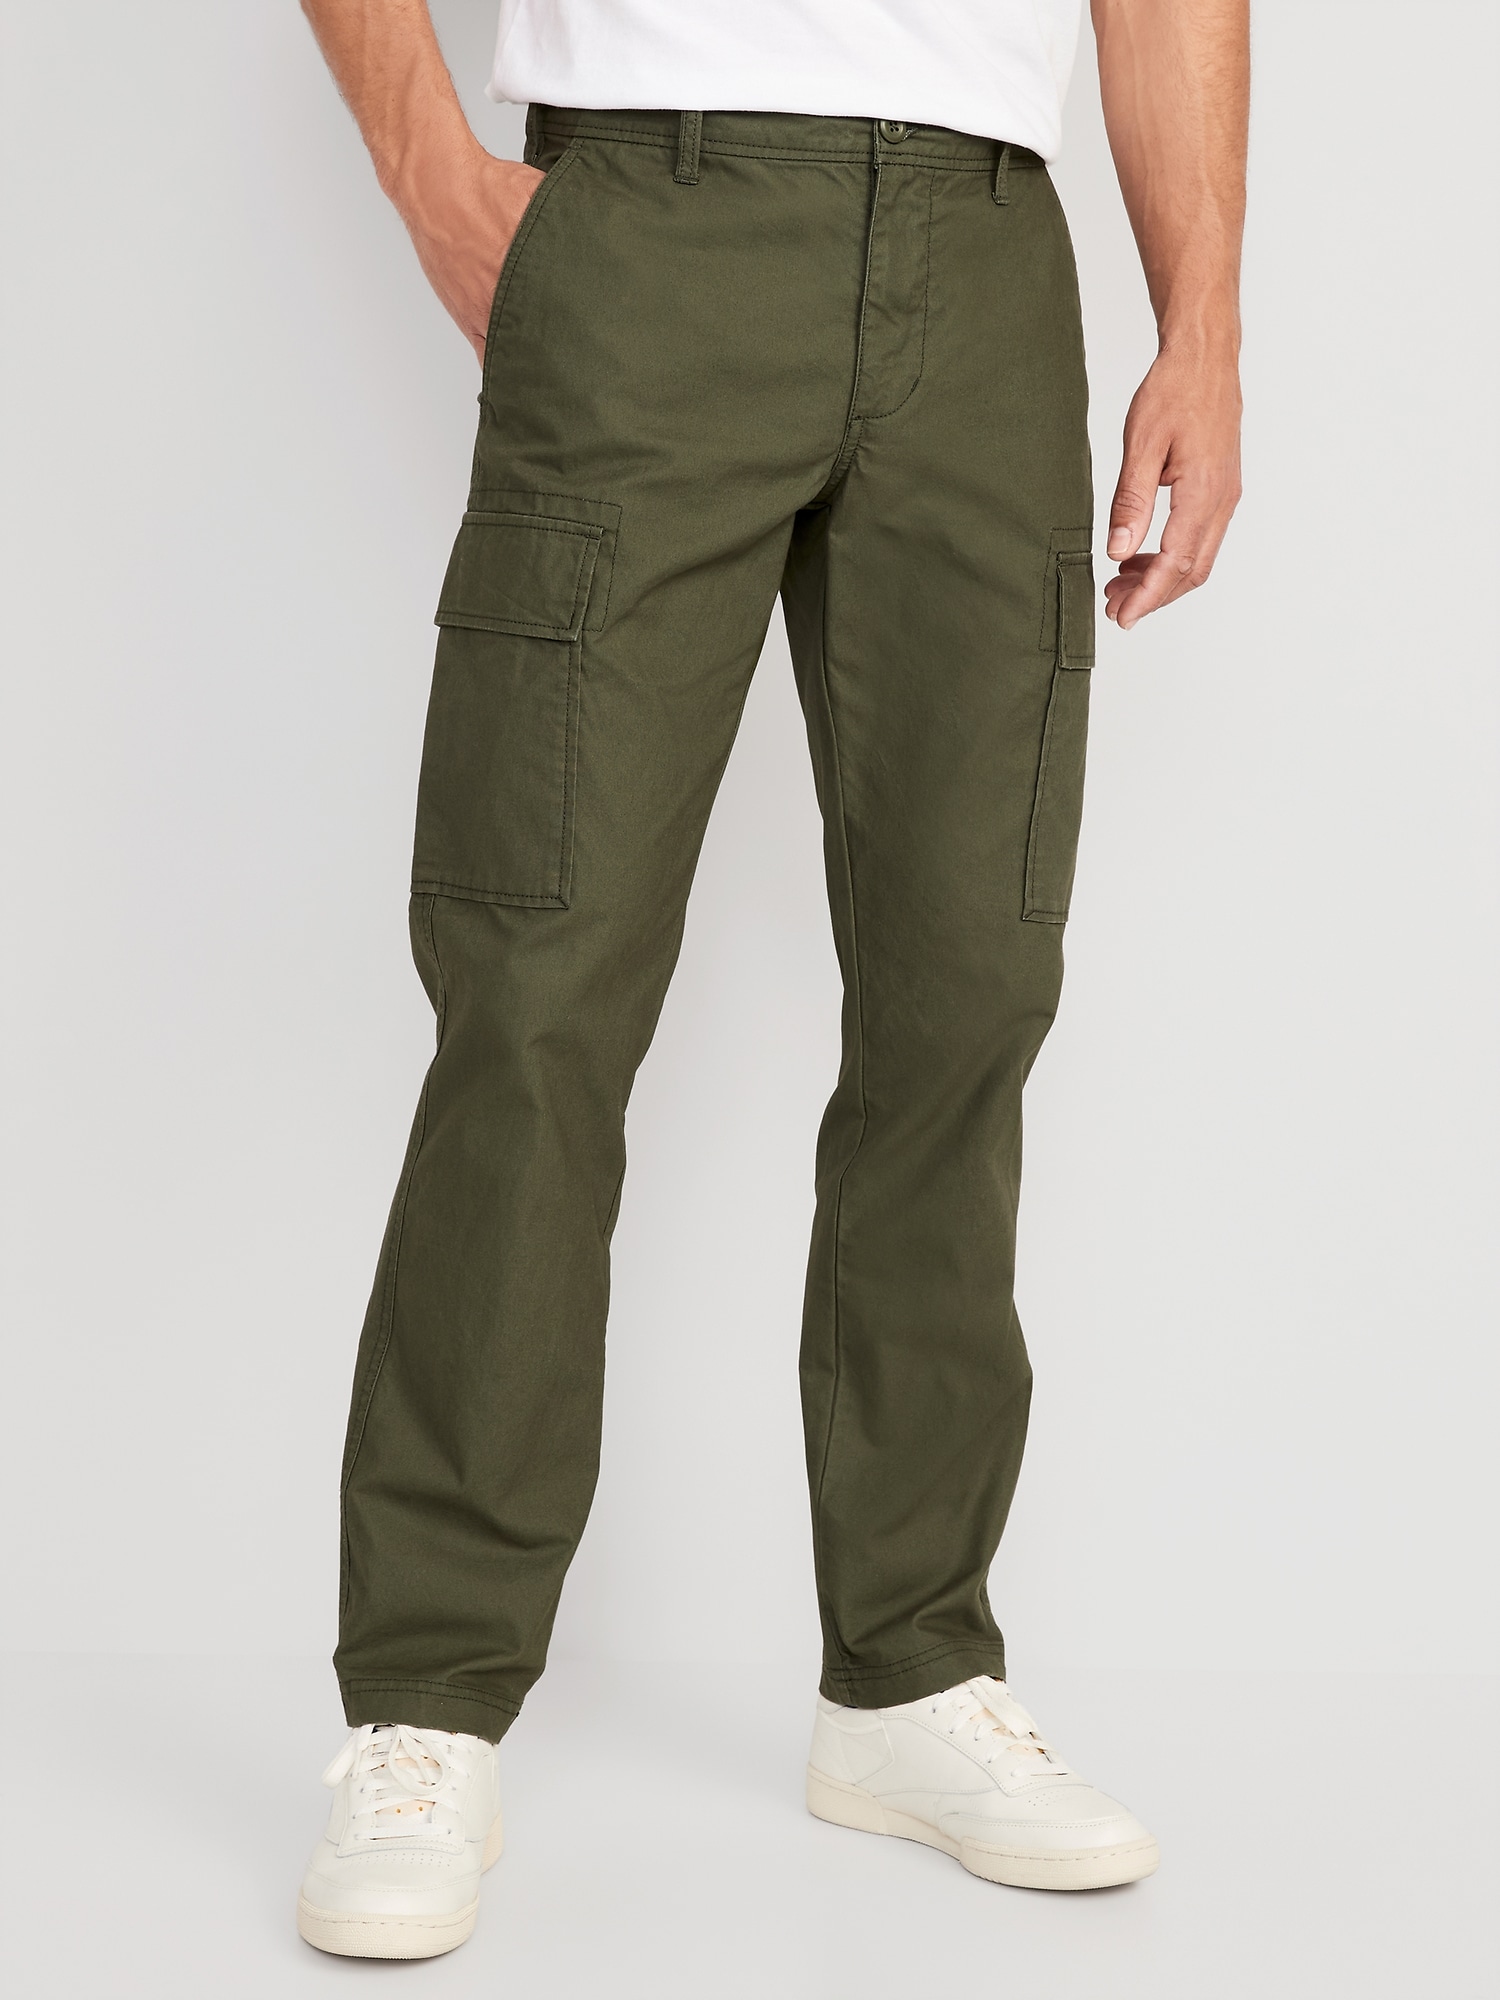 Old Navy Straight Oxford Cargo Pants brown. 1